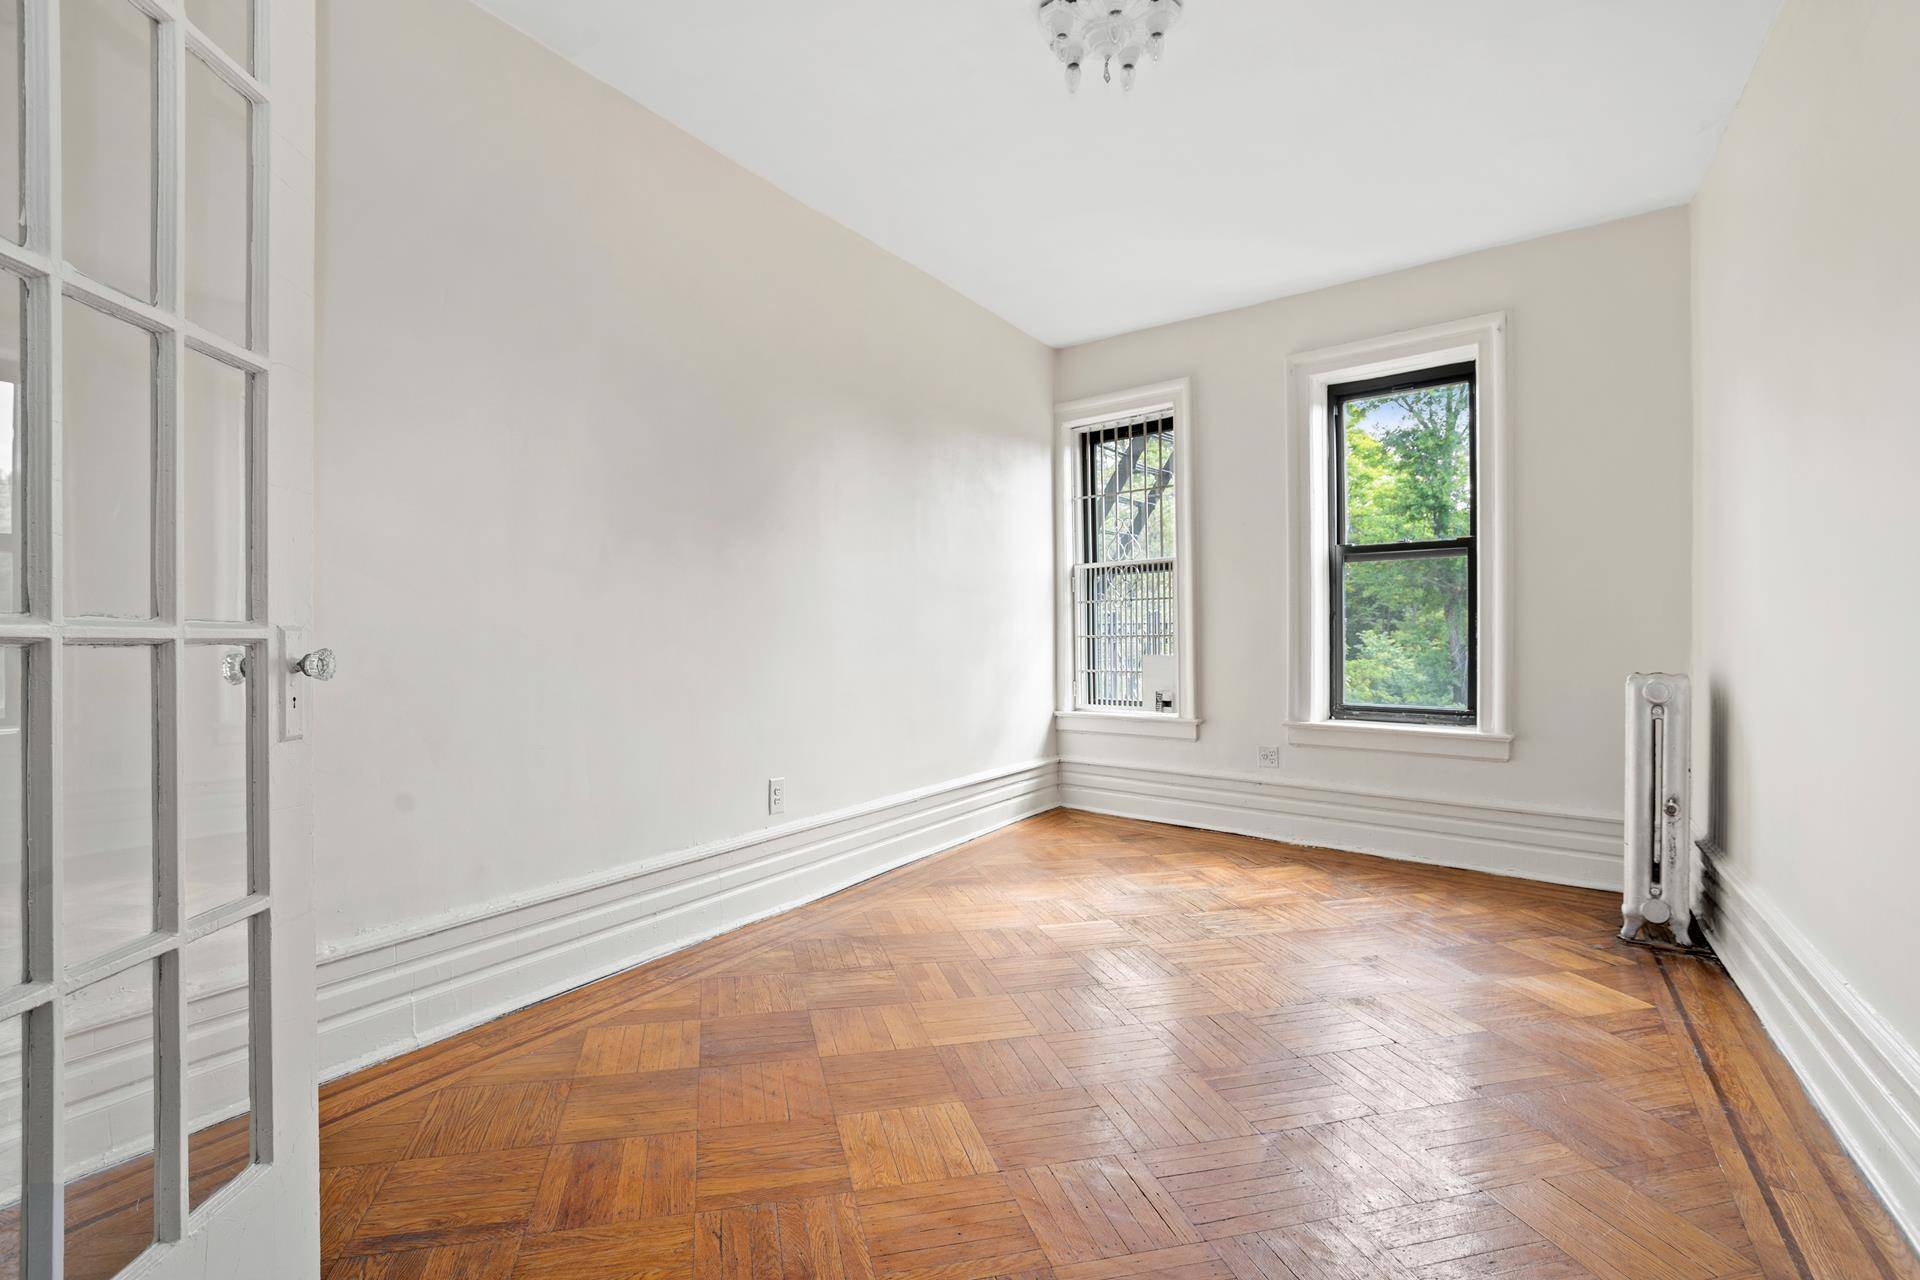 Residence 12 is a spacious, prewar, Prospect Park facing home, with oak coffered ceilings and moldings.